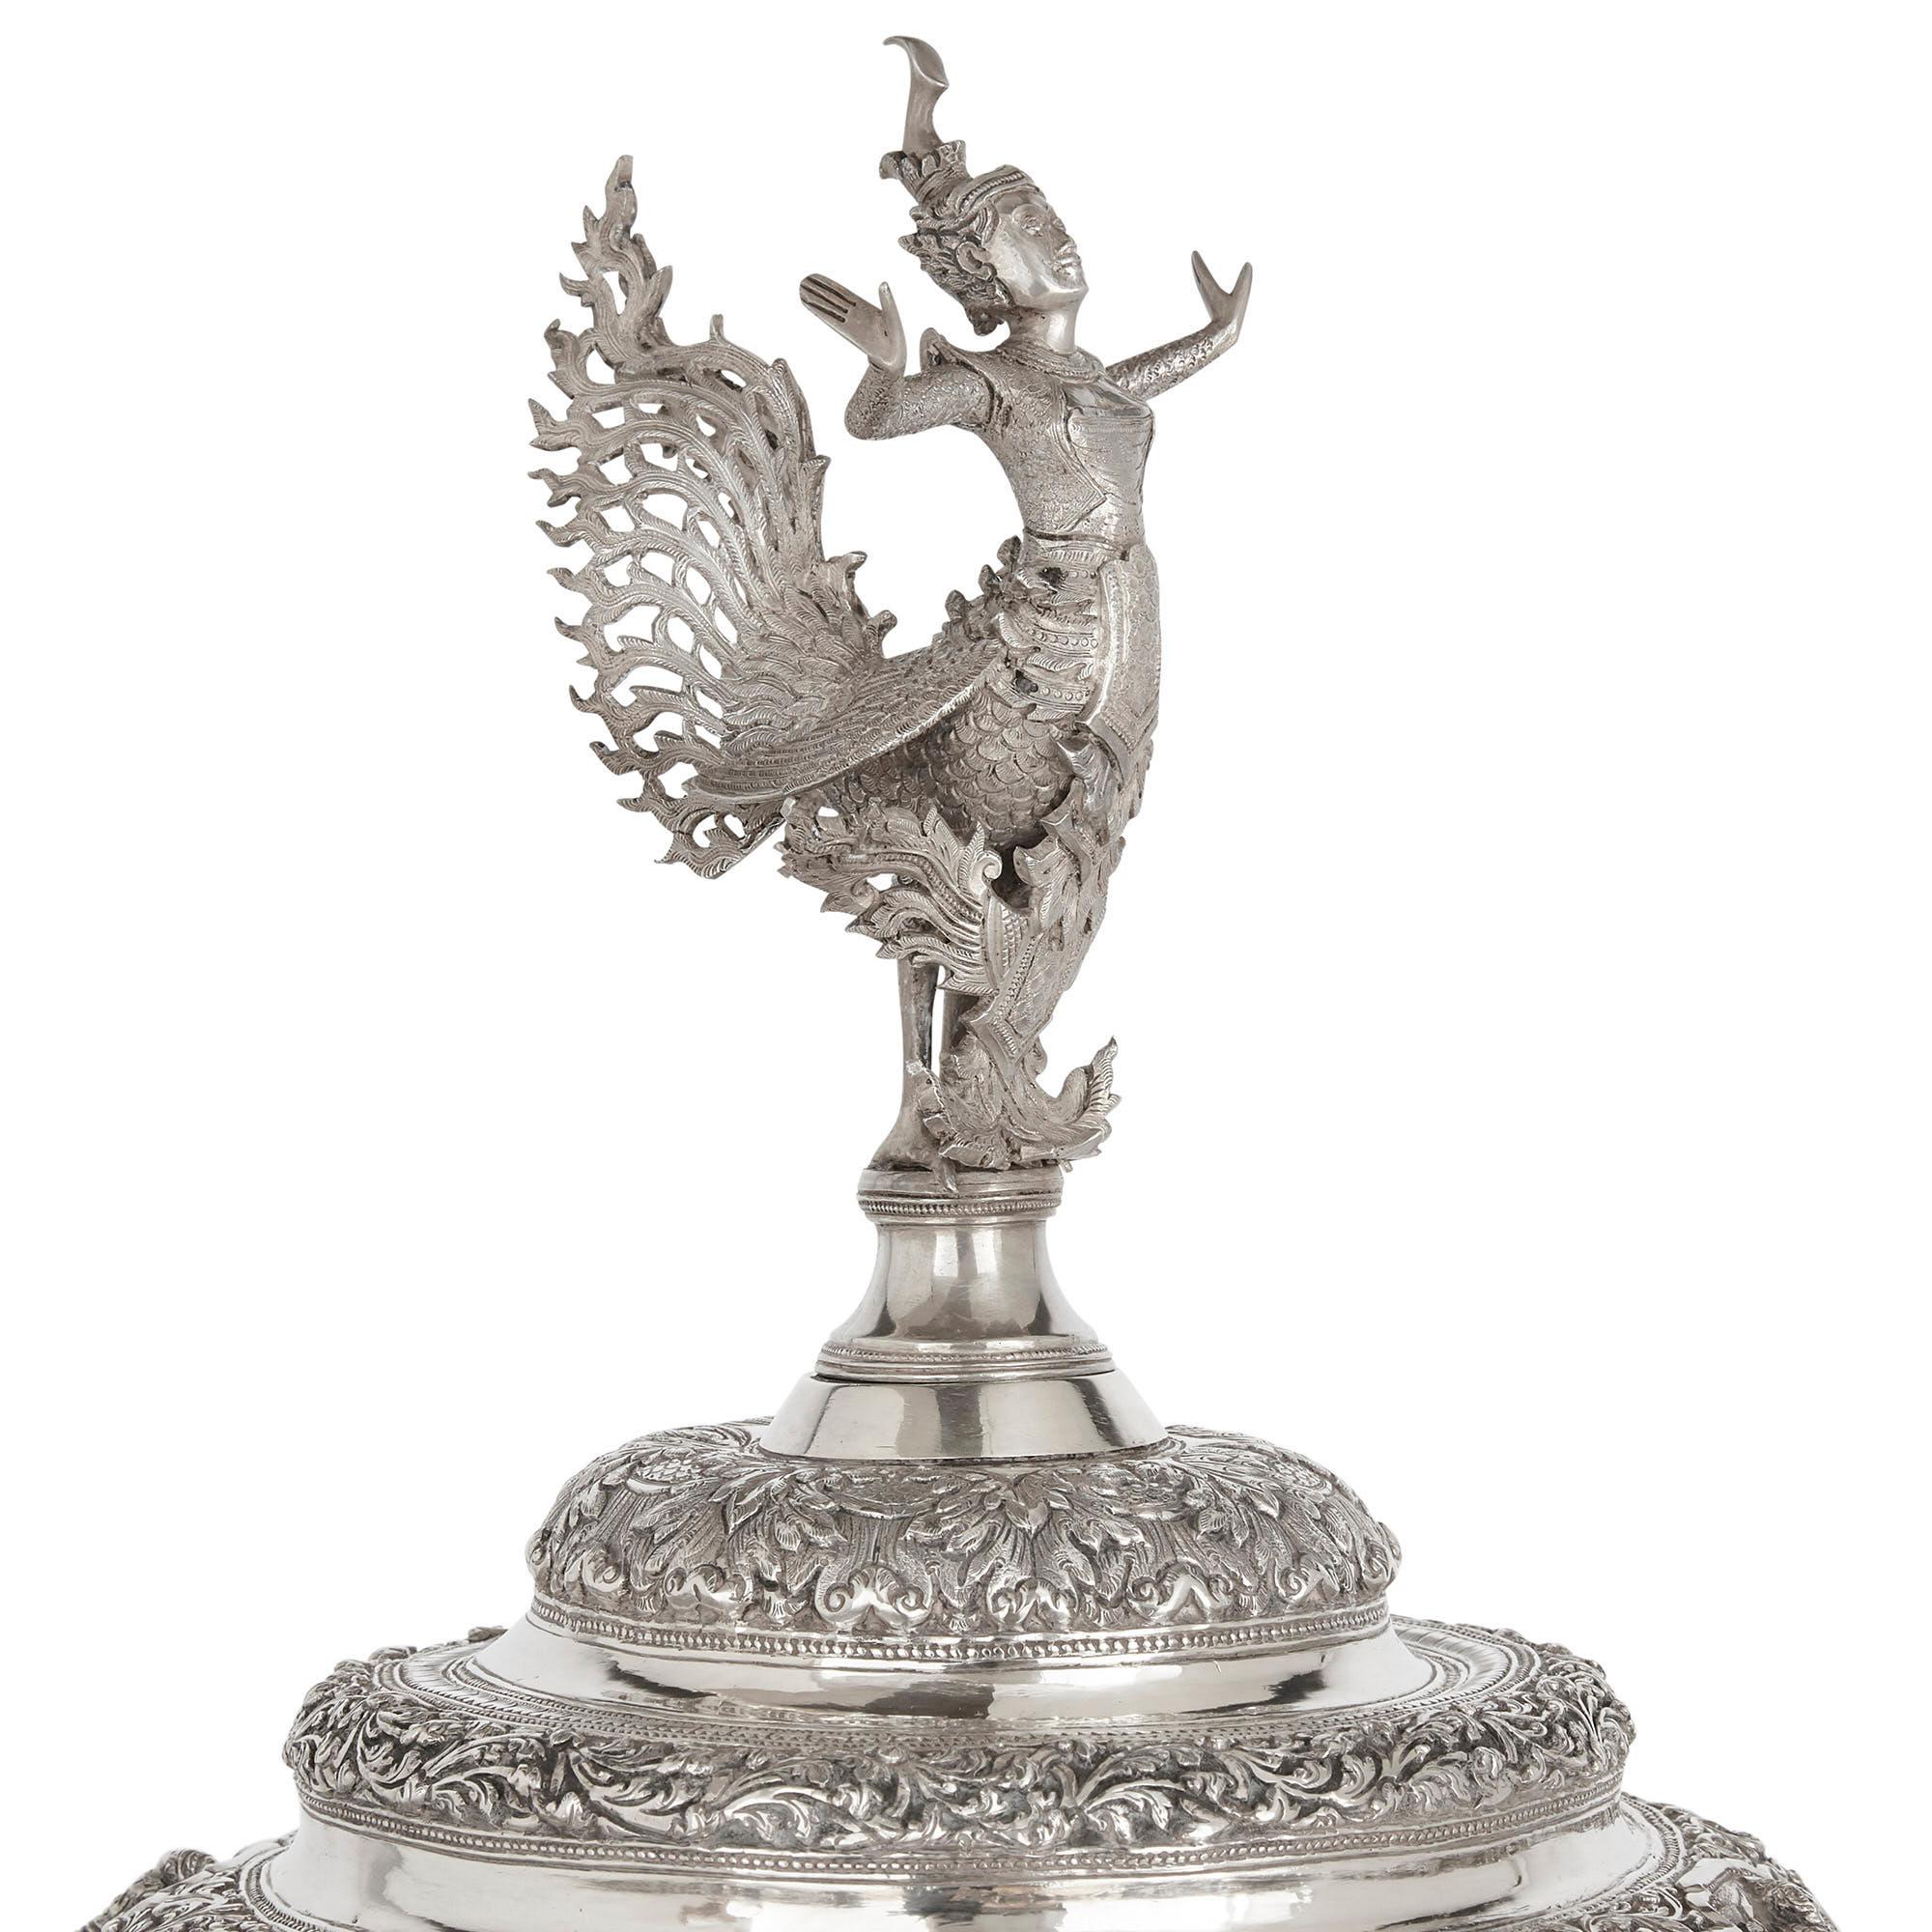 This large silver centrepiece vase is an aggrandised version of a type of Buddhist bowl from Burma (modern day Myanmar).

The surface of the bowl is divided into eight scenes from Burmese legend, the vignettes including warriors, courtiers, and